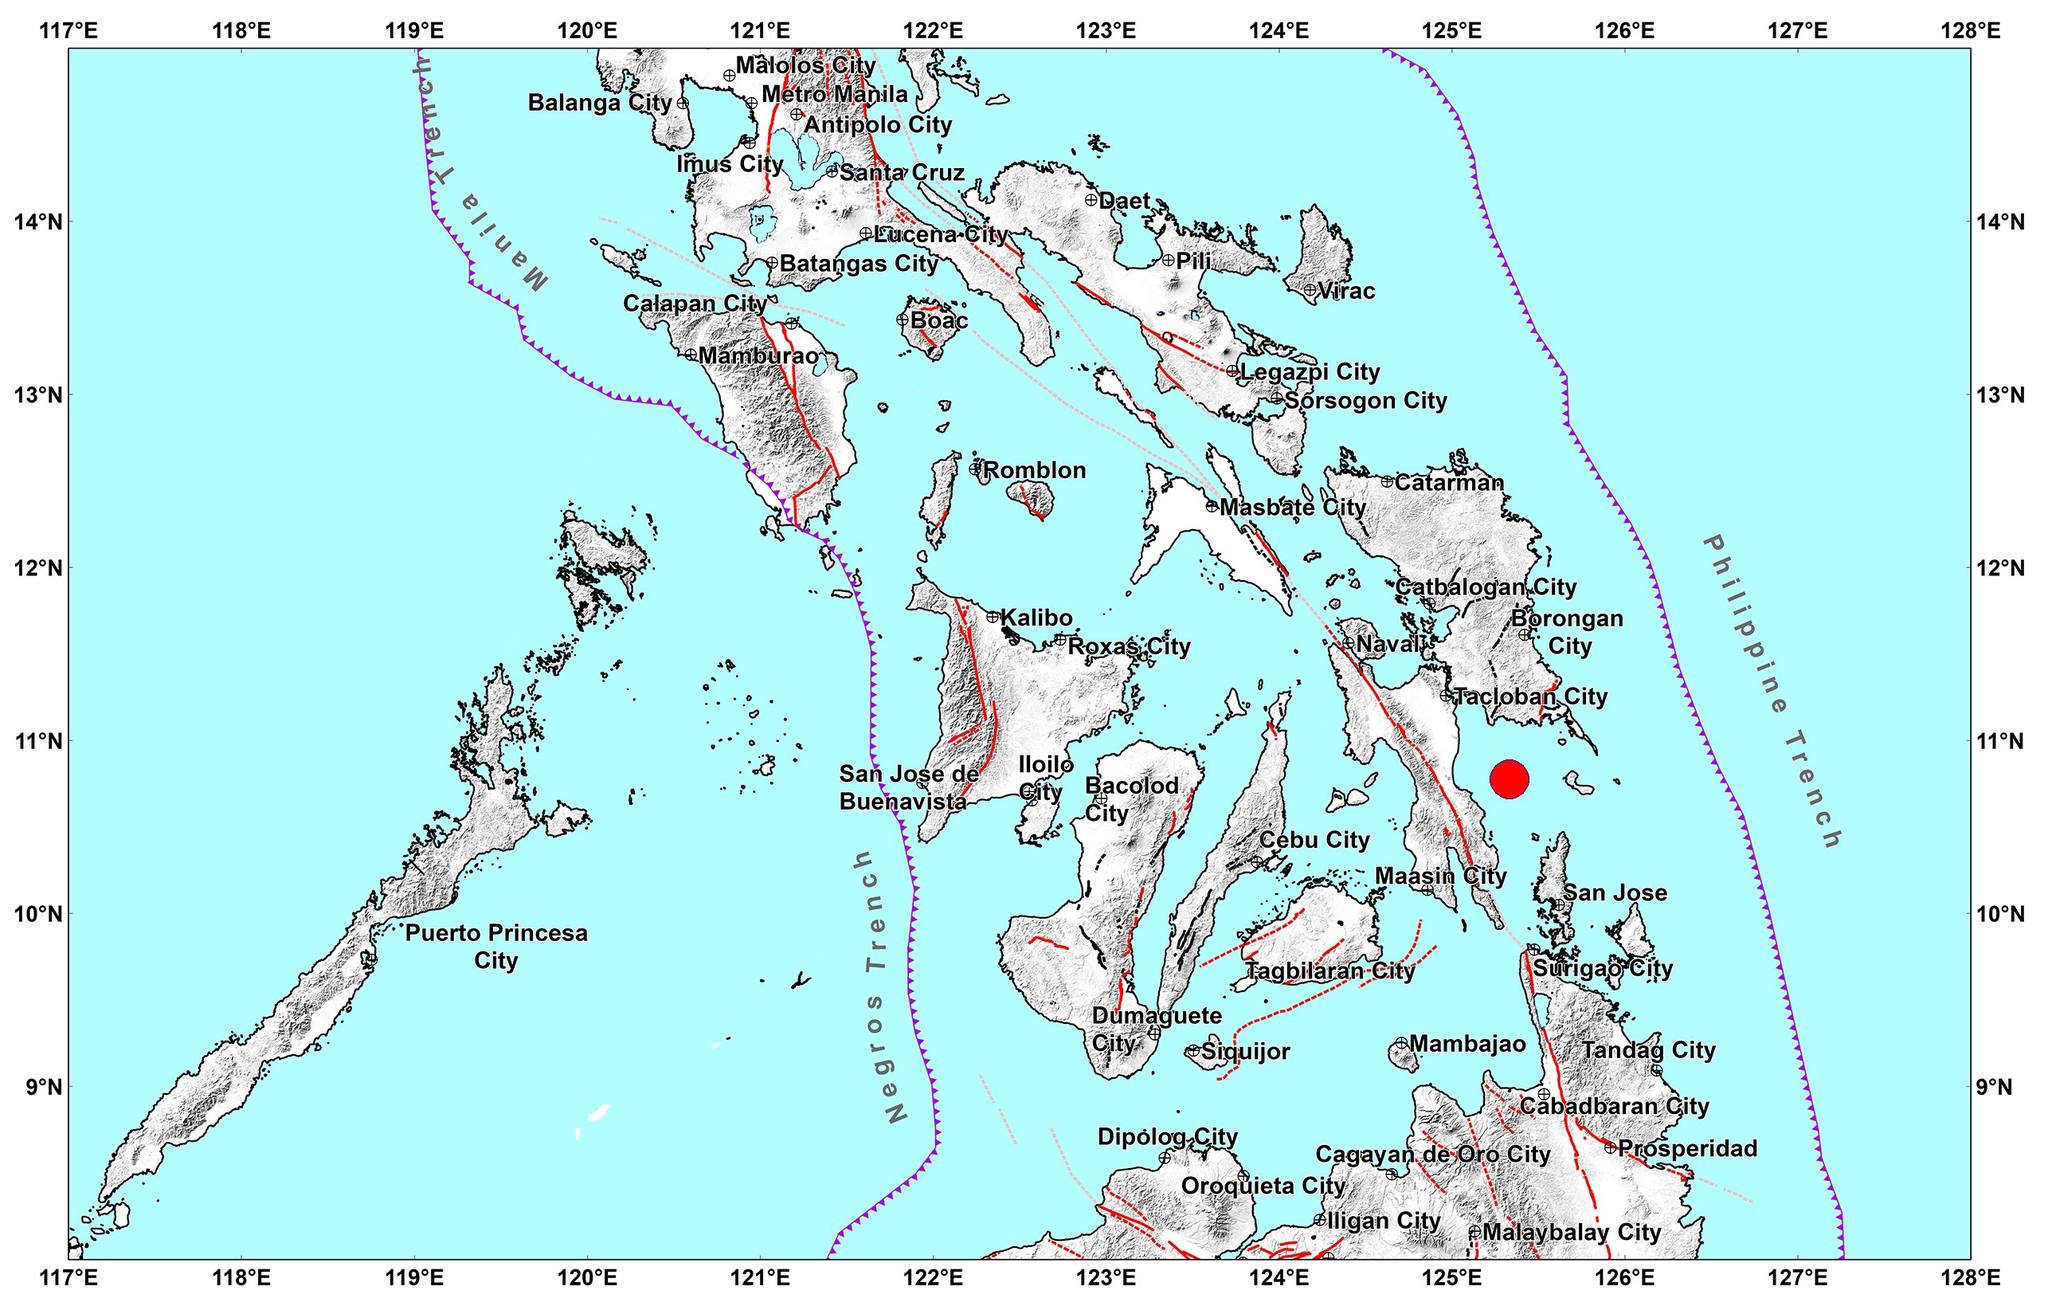 A magnitude 5.8 earthquake struck the waters off Abuyog, Leyte, on Friday evening, the Philippine Institute of Volcanology and Seismology (Phivolcs) said.